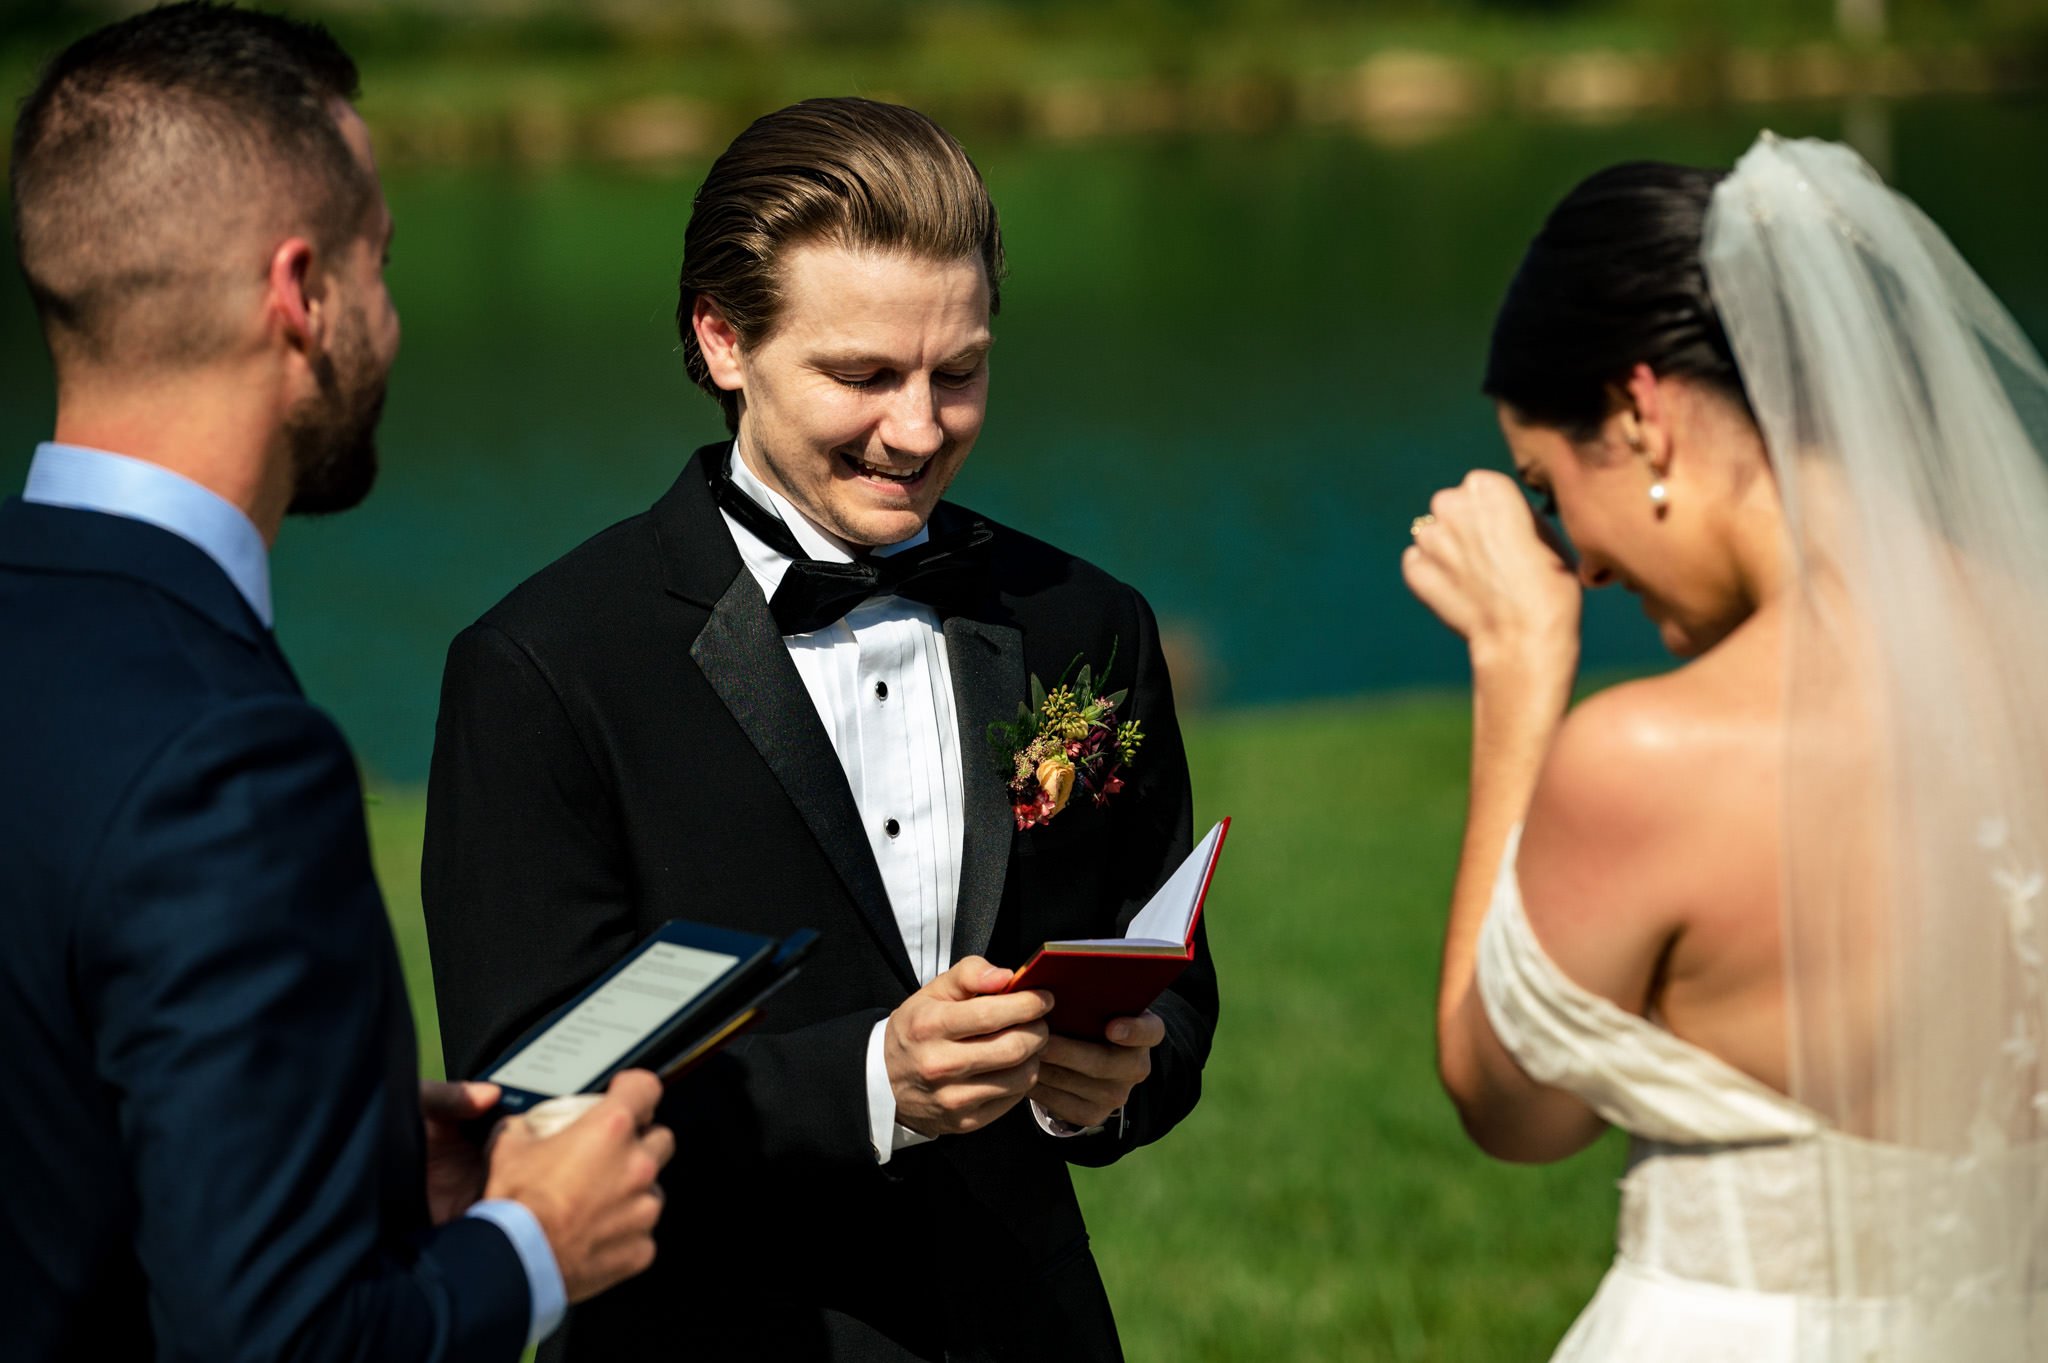 A bride and groom exchanging their wedding vows in front of an asheville lake.